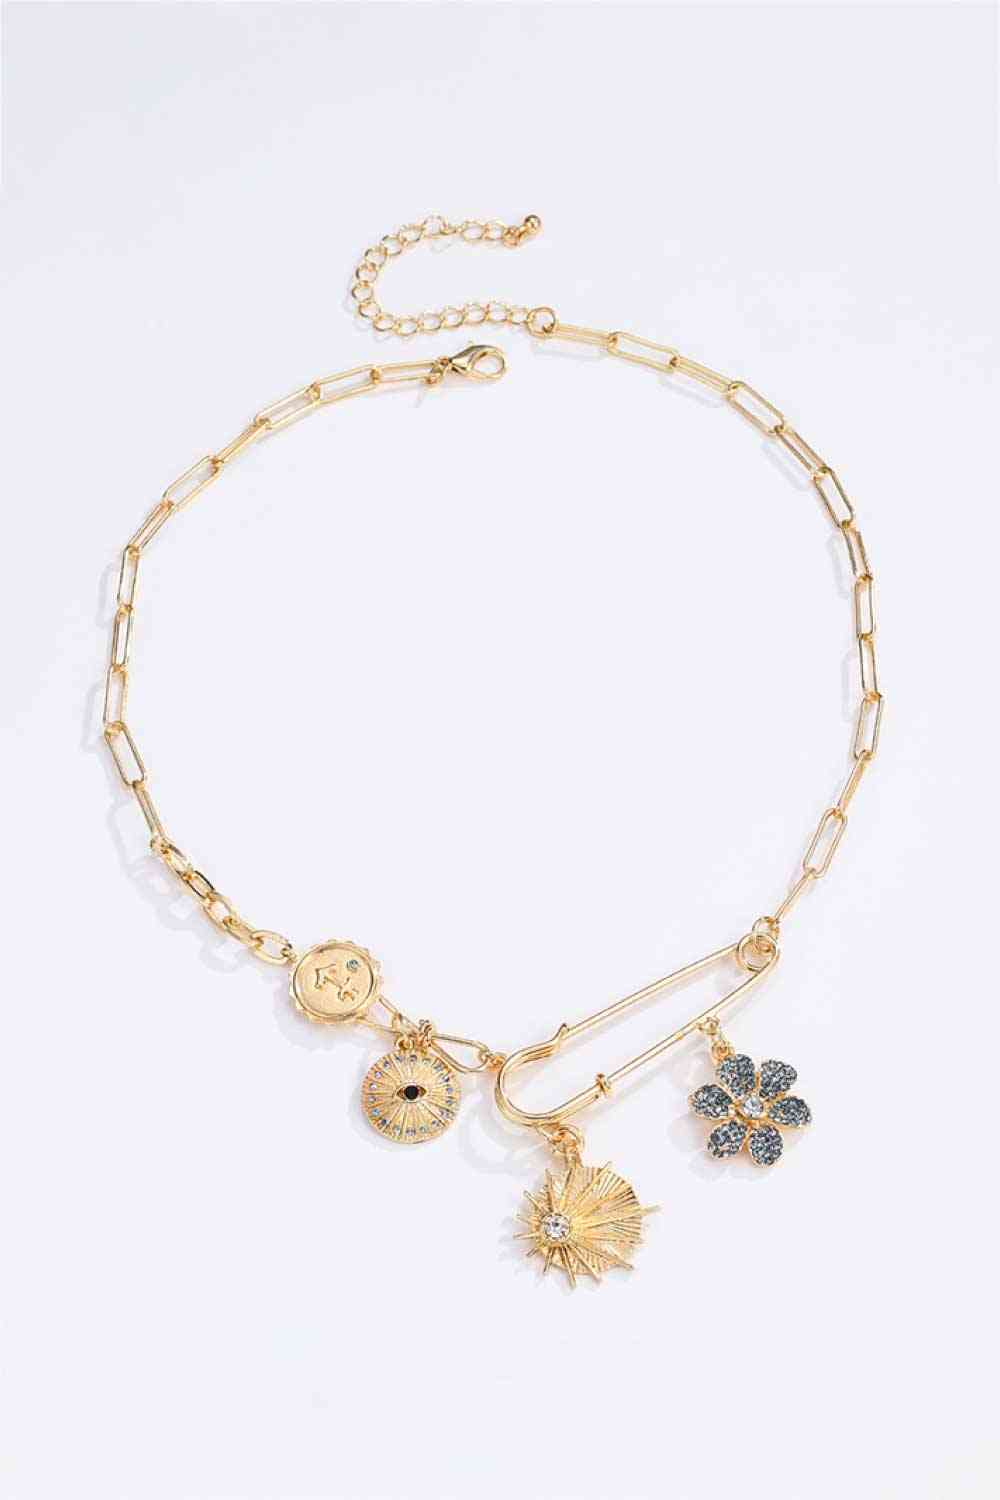 5-Piece Wholesale Rhinestone Flower Paperclip Chain Necklace